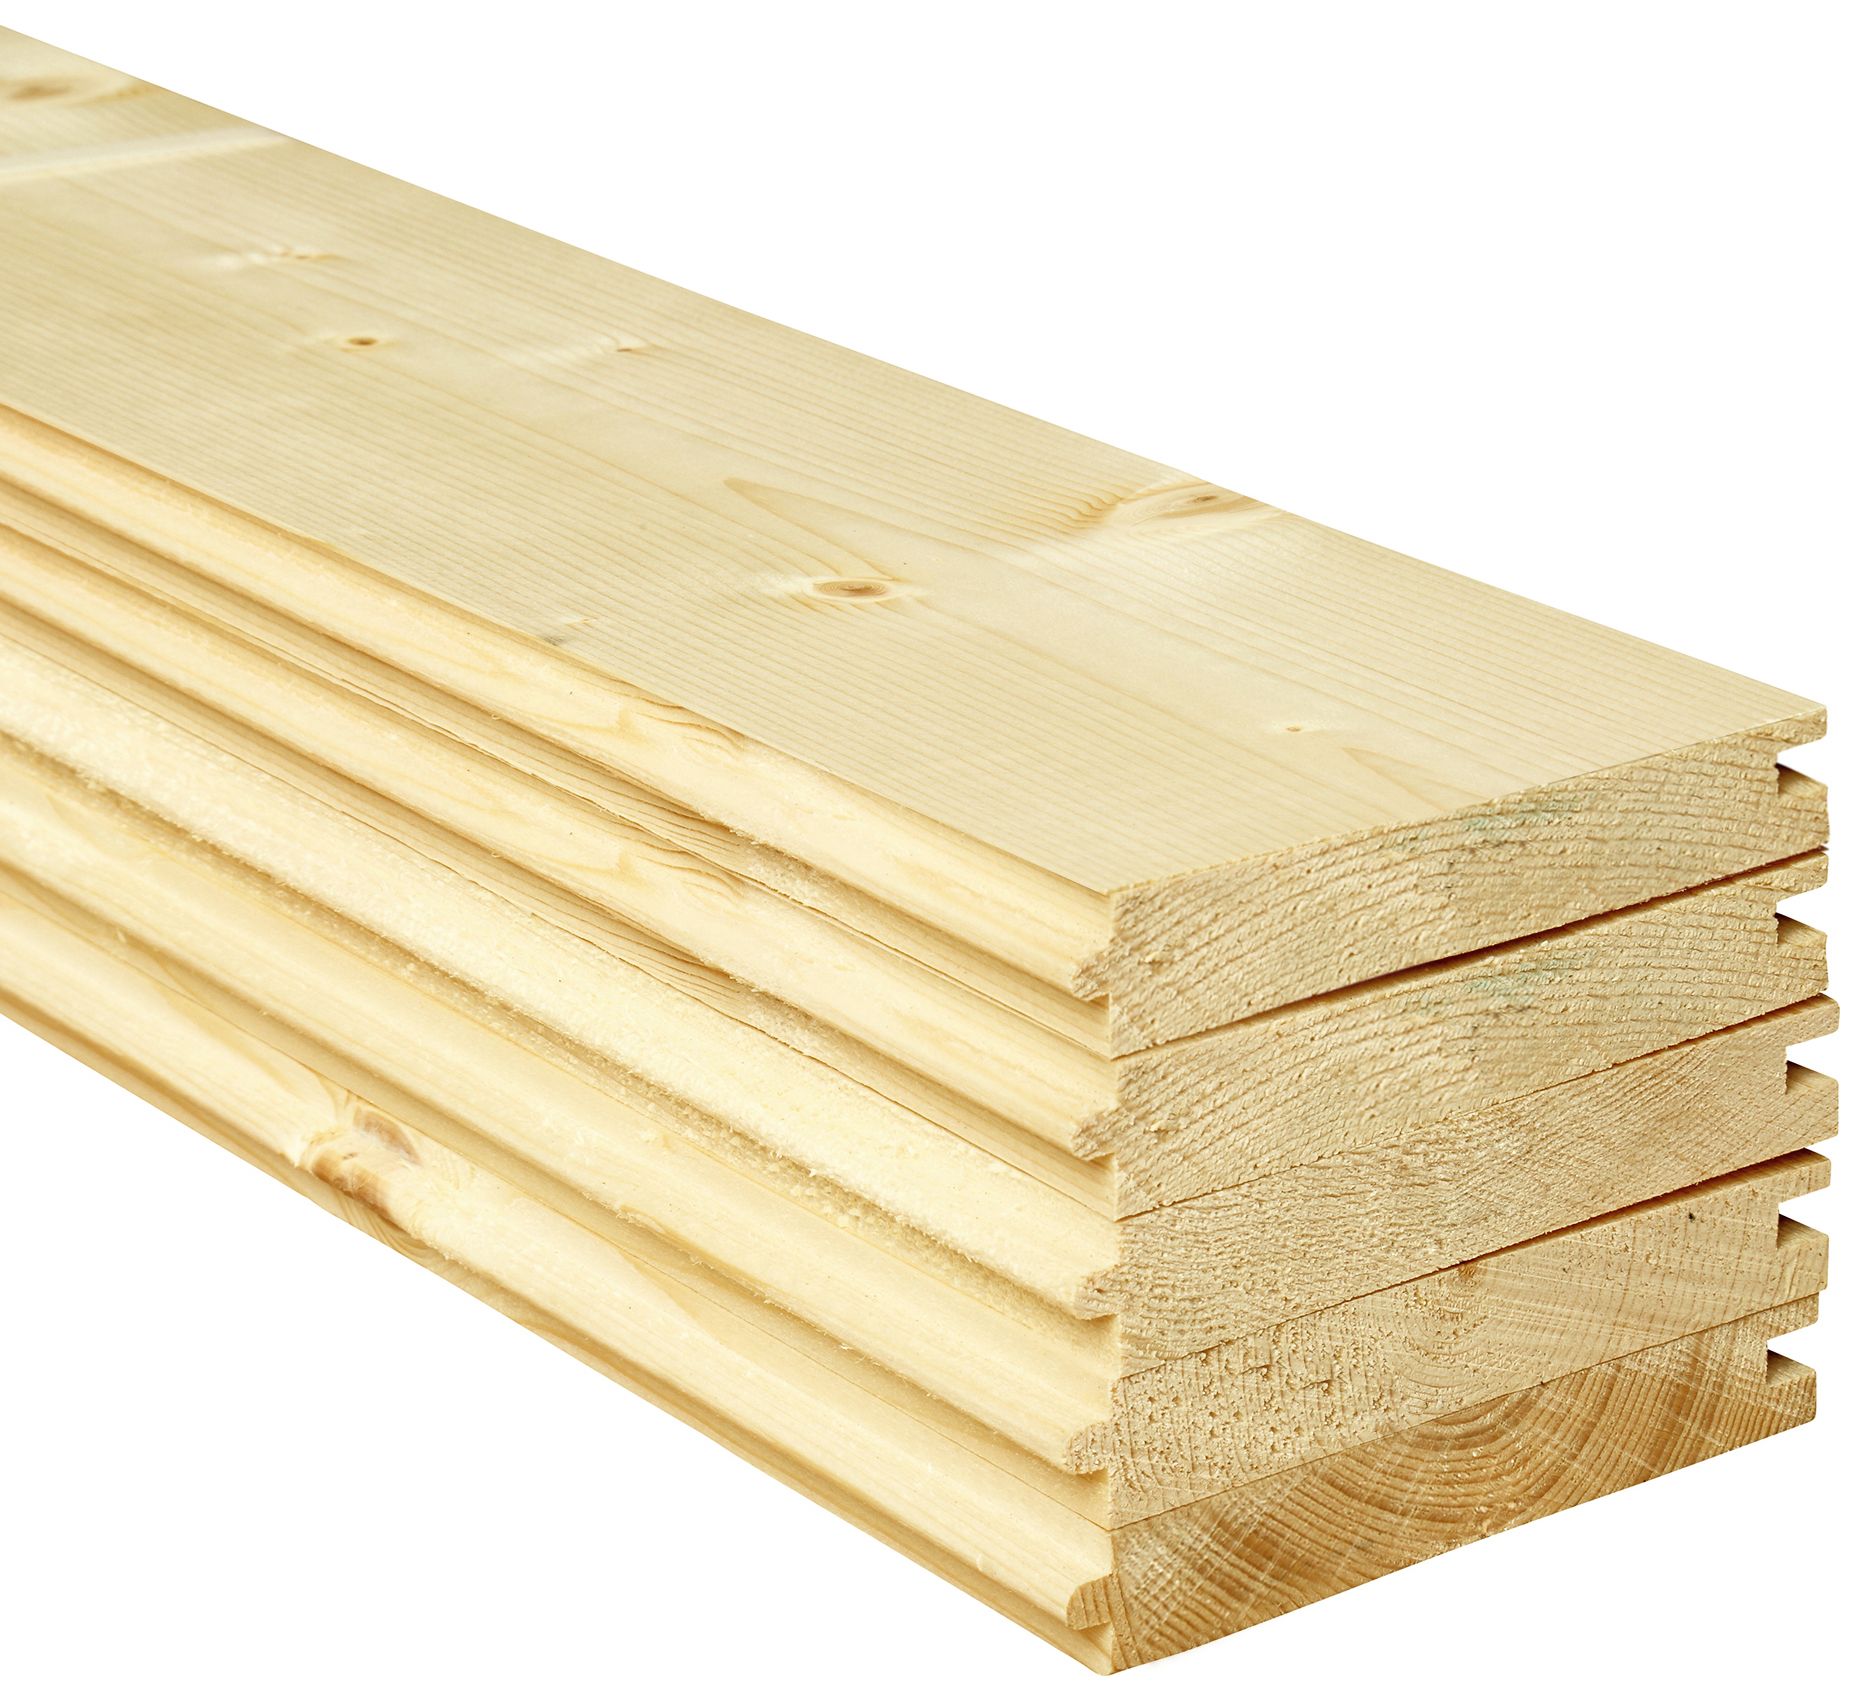 Image of PTG Floorboards - 21mm x 137mm x 1.8m - Pack of 5